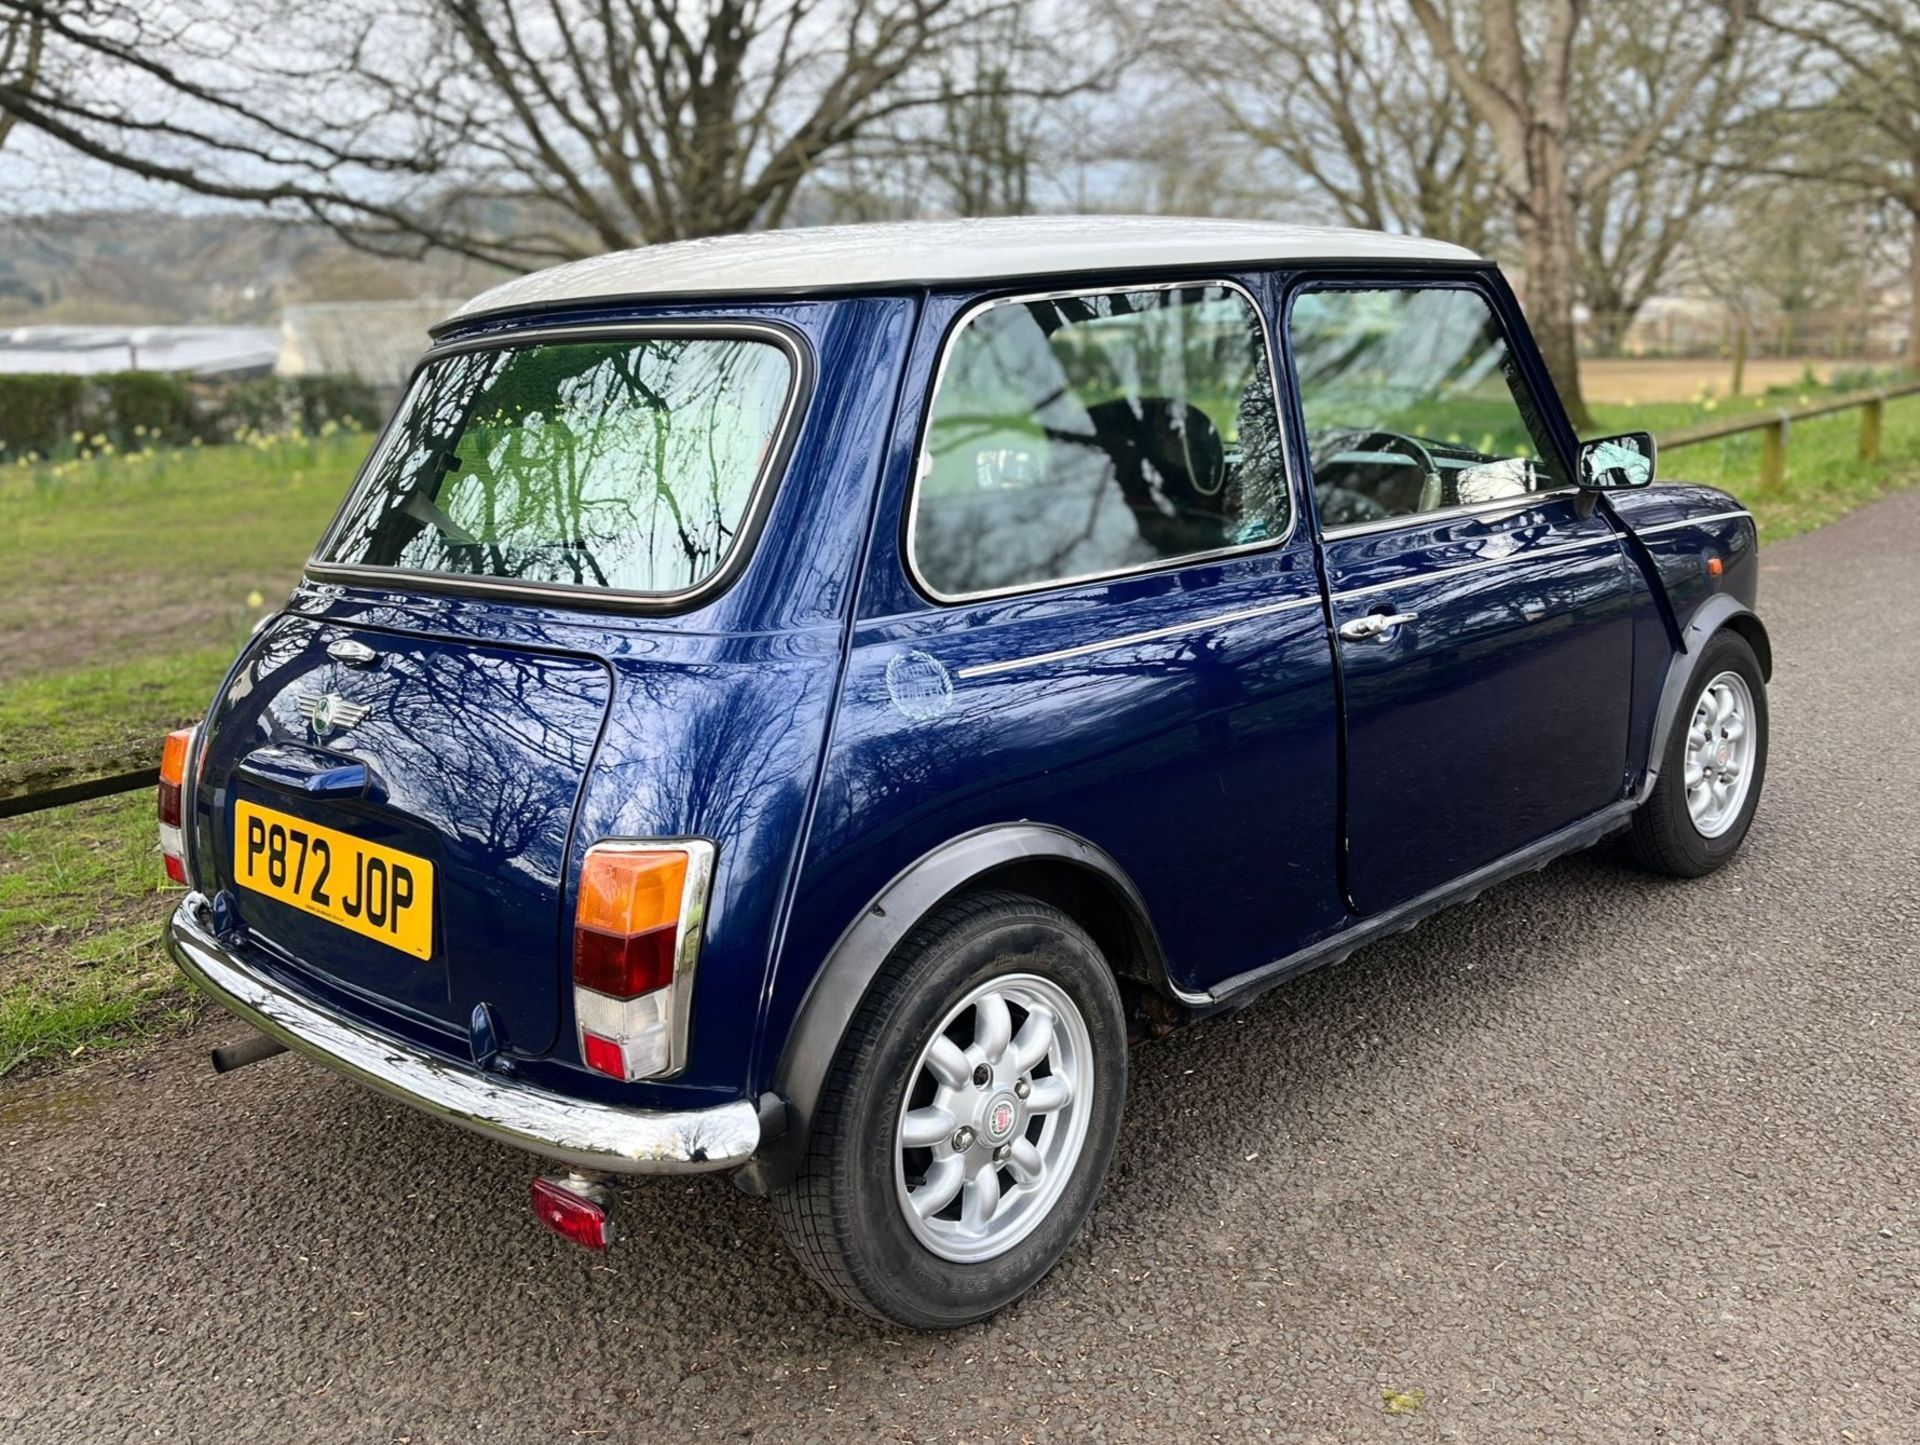 1997 MINI COOPER MPI Registration Number: P872 JOP Chassis Number: SAXXNNAZEBD141820 Recorded - Image 3 of 13